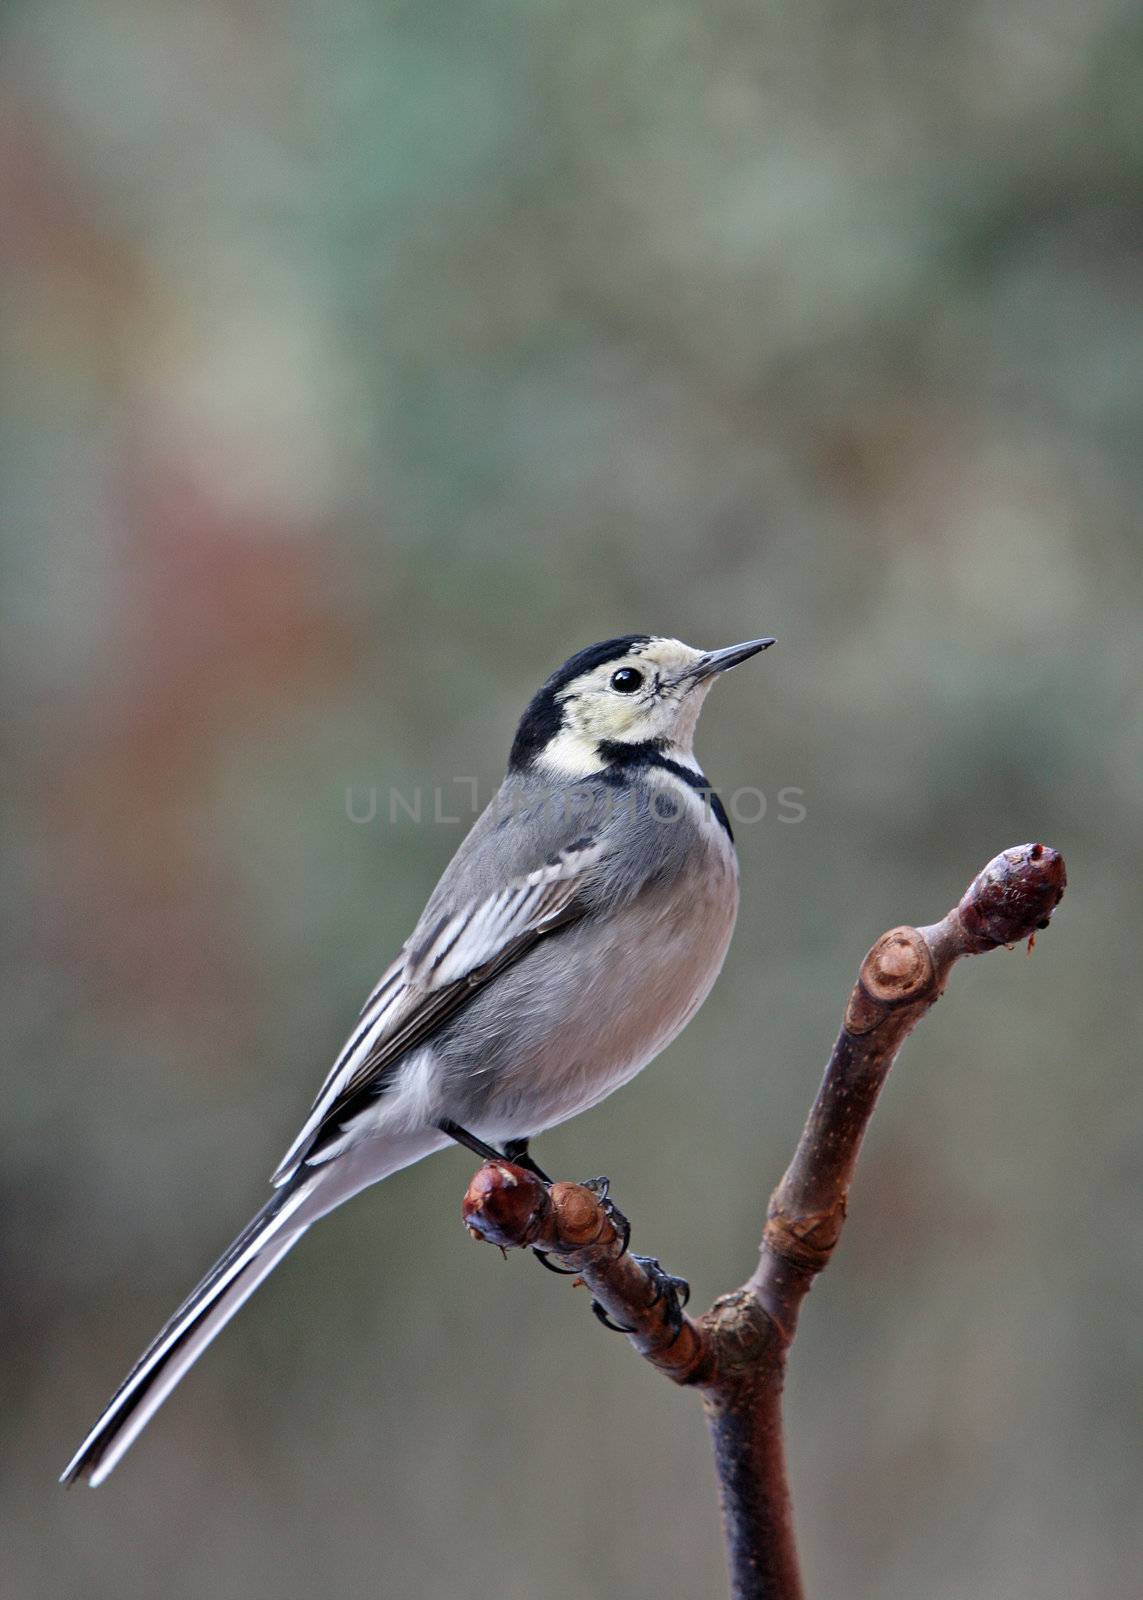 A Pied Wagtail - Motacilla alba - perched on a Horse Chestnut branch.